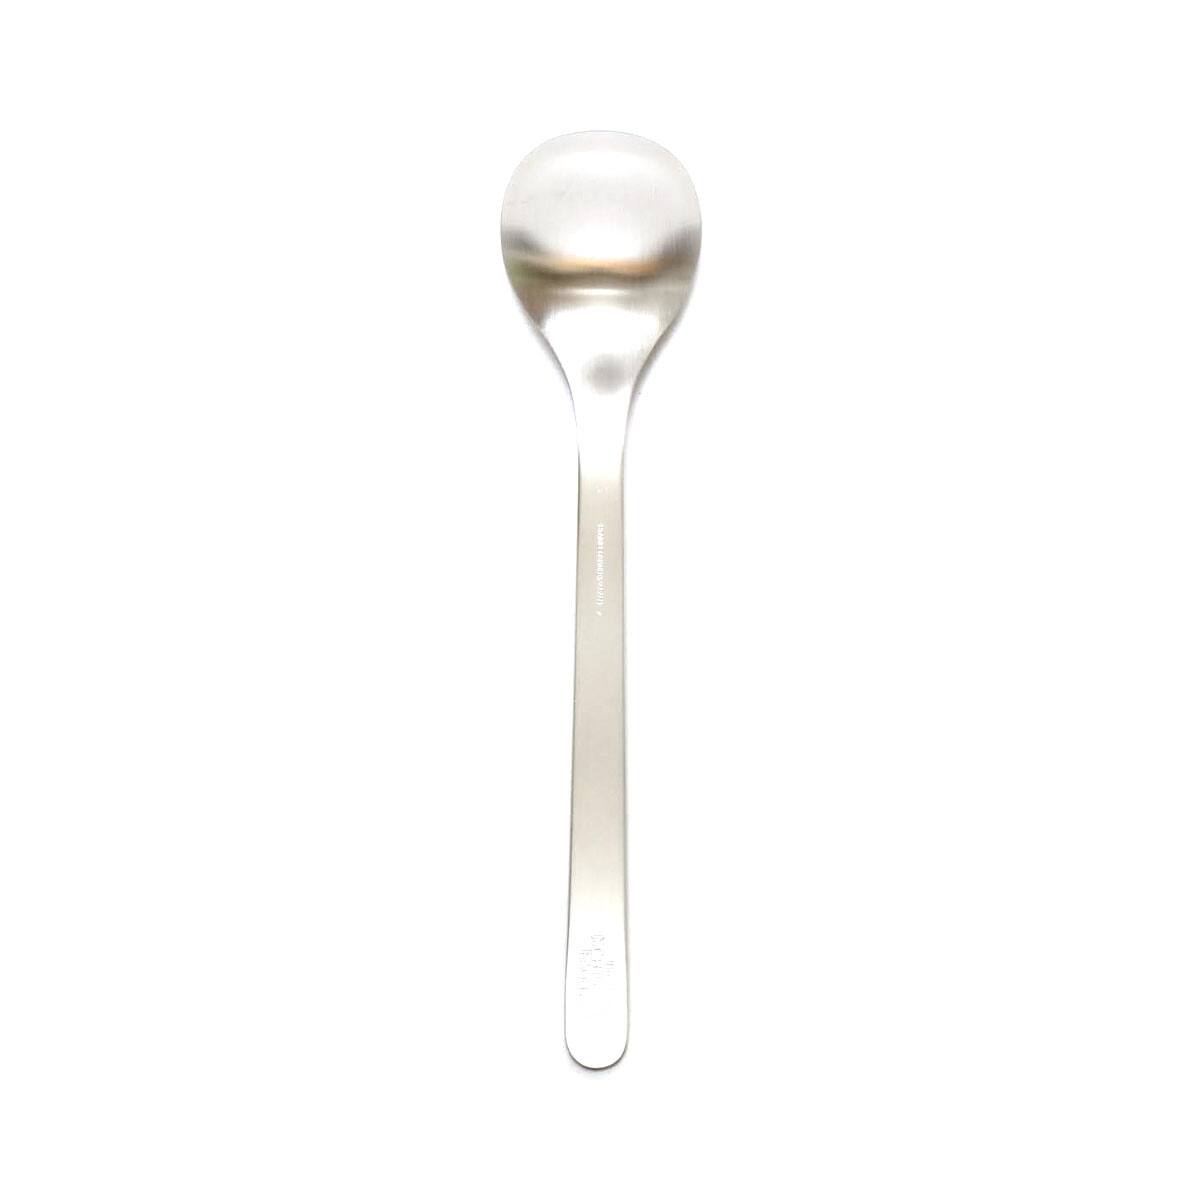 THE NORTH FACE LAND ARMS SPOON SILVER 22SS-I